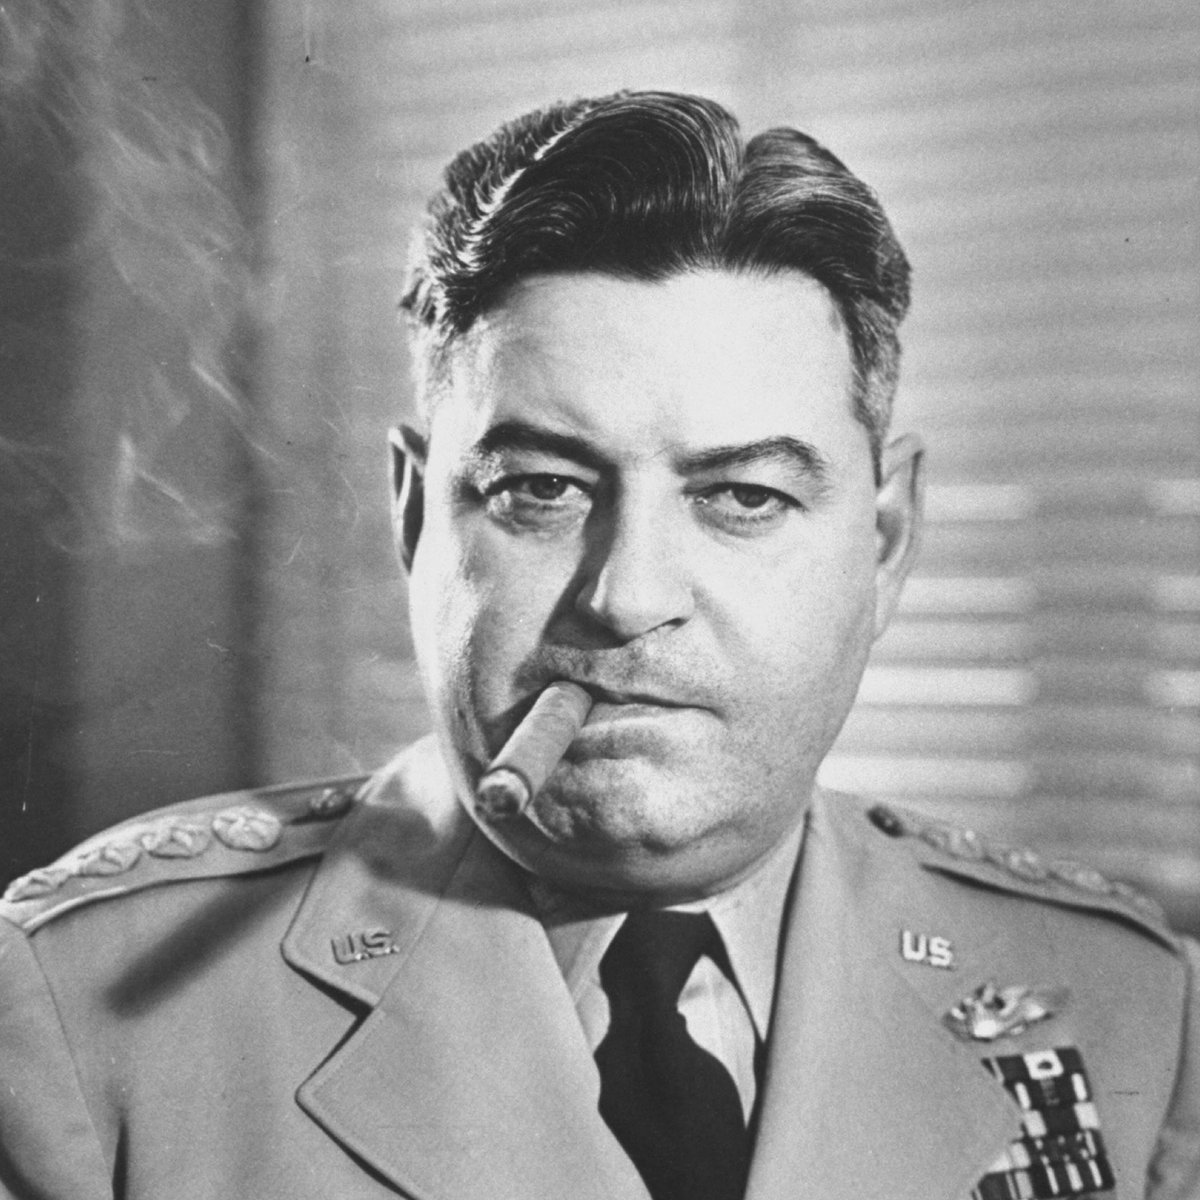 Strategic bombing was suicide mission after suicide mission.Curtis E. LeMay fixed strategic bombing in Europe, and then generals RECREATED THE CATASTROPHE IN THE PACIFIC.LeMay agreed to fix it AGAIN if all his opponents were instantly fired.